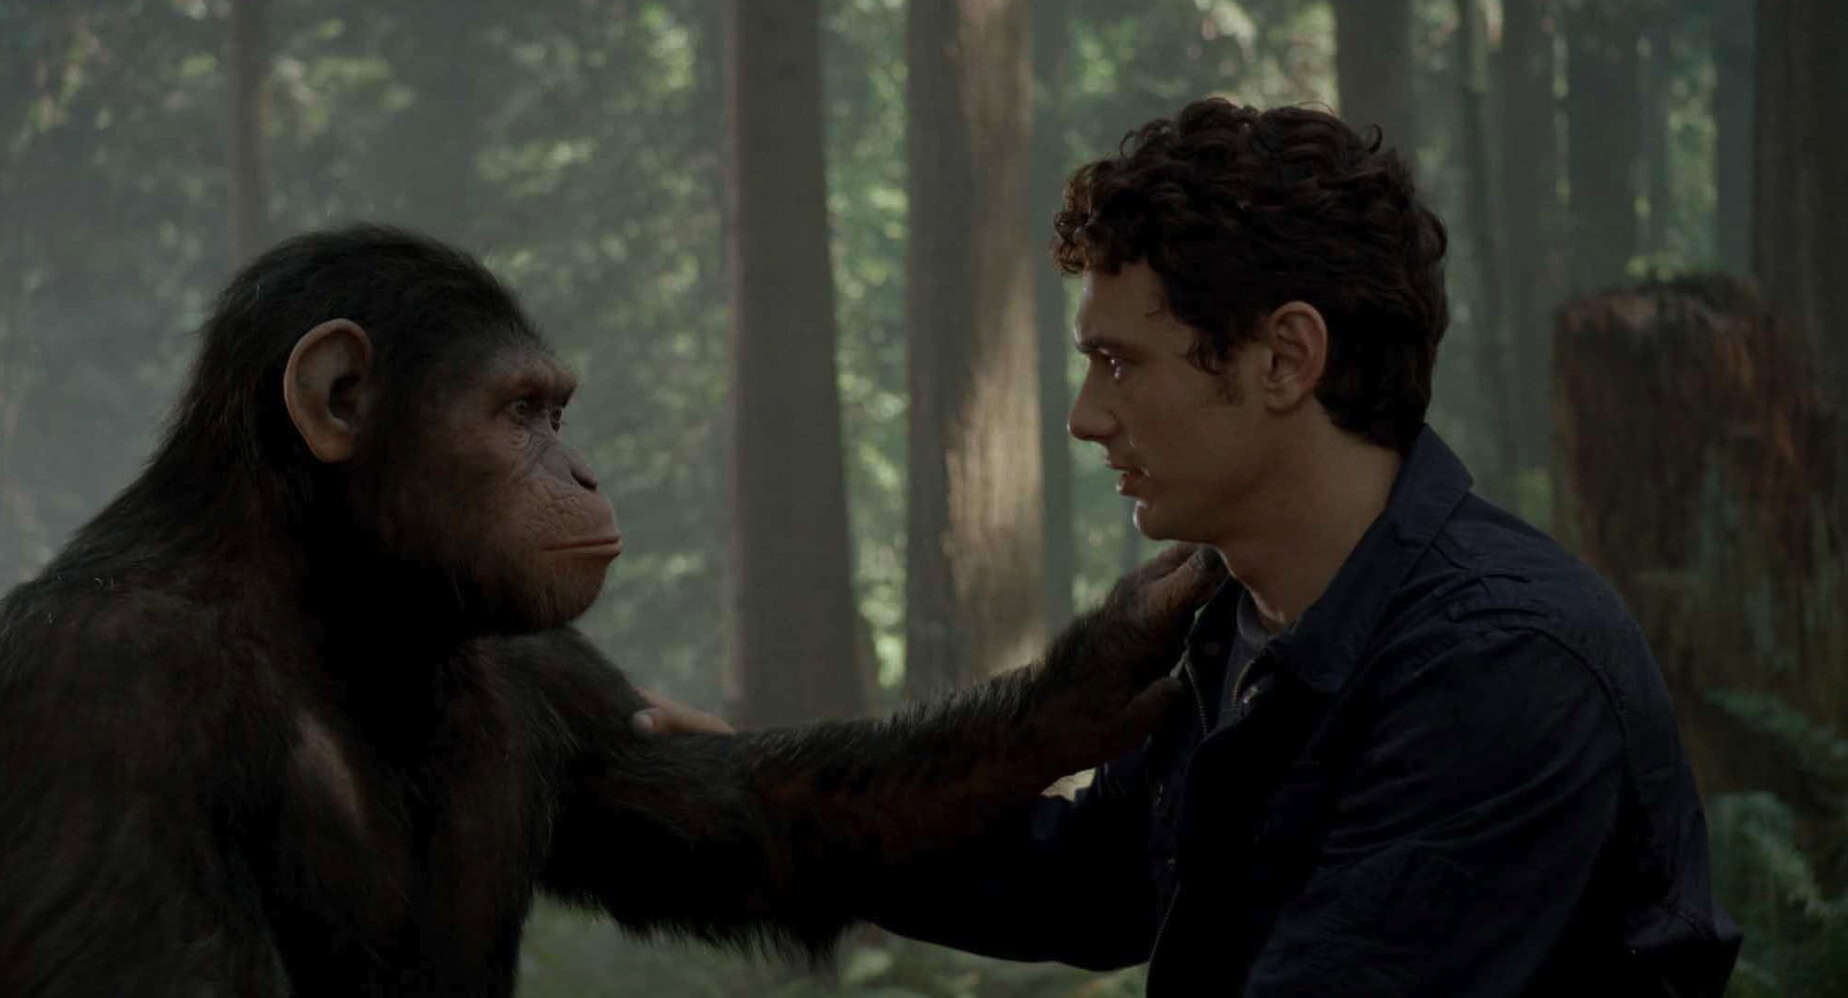 v An ape and a man touch each other’s shoulders in this image from Chernin Entertainment.